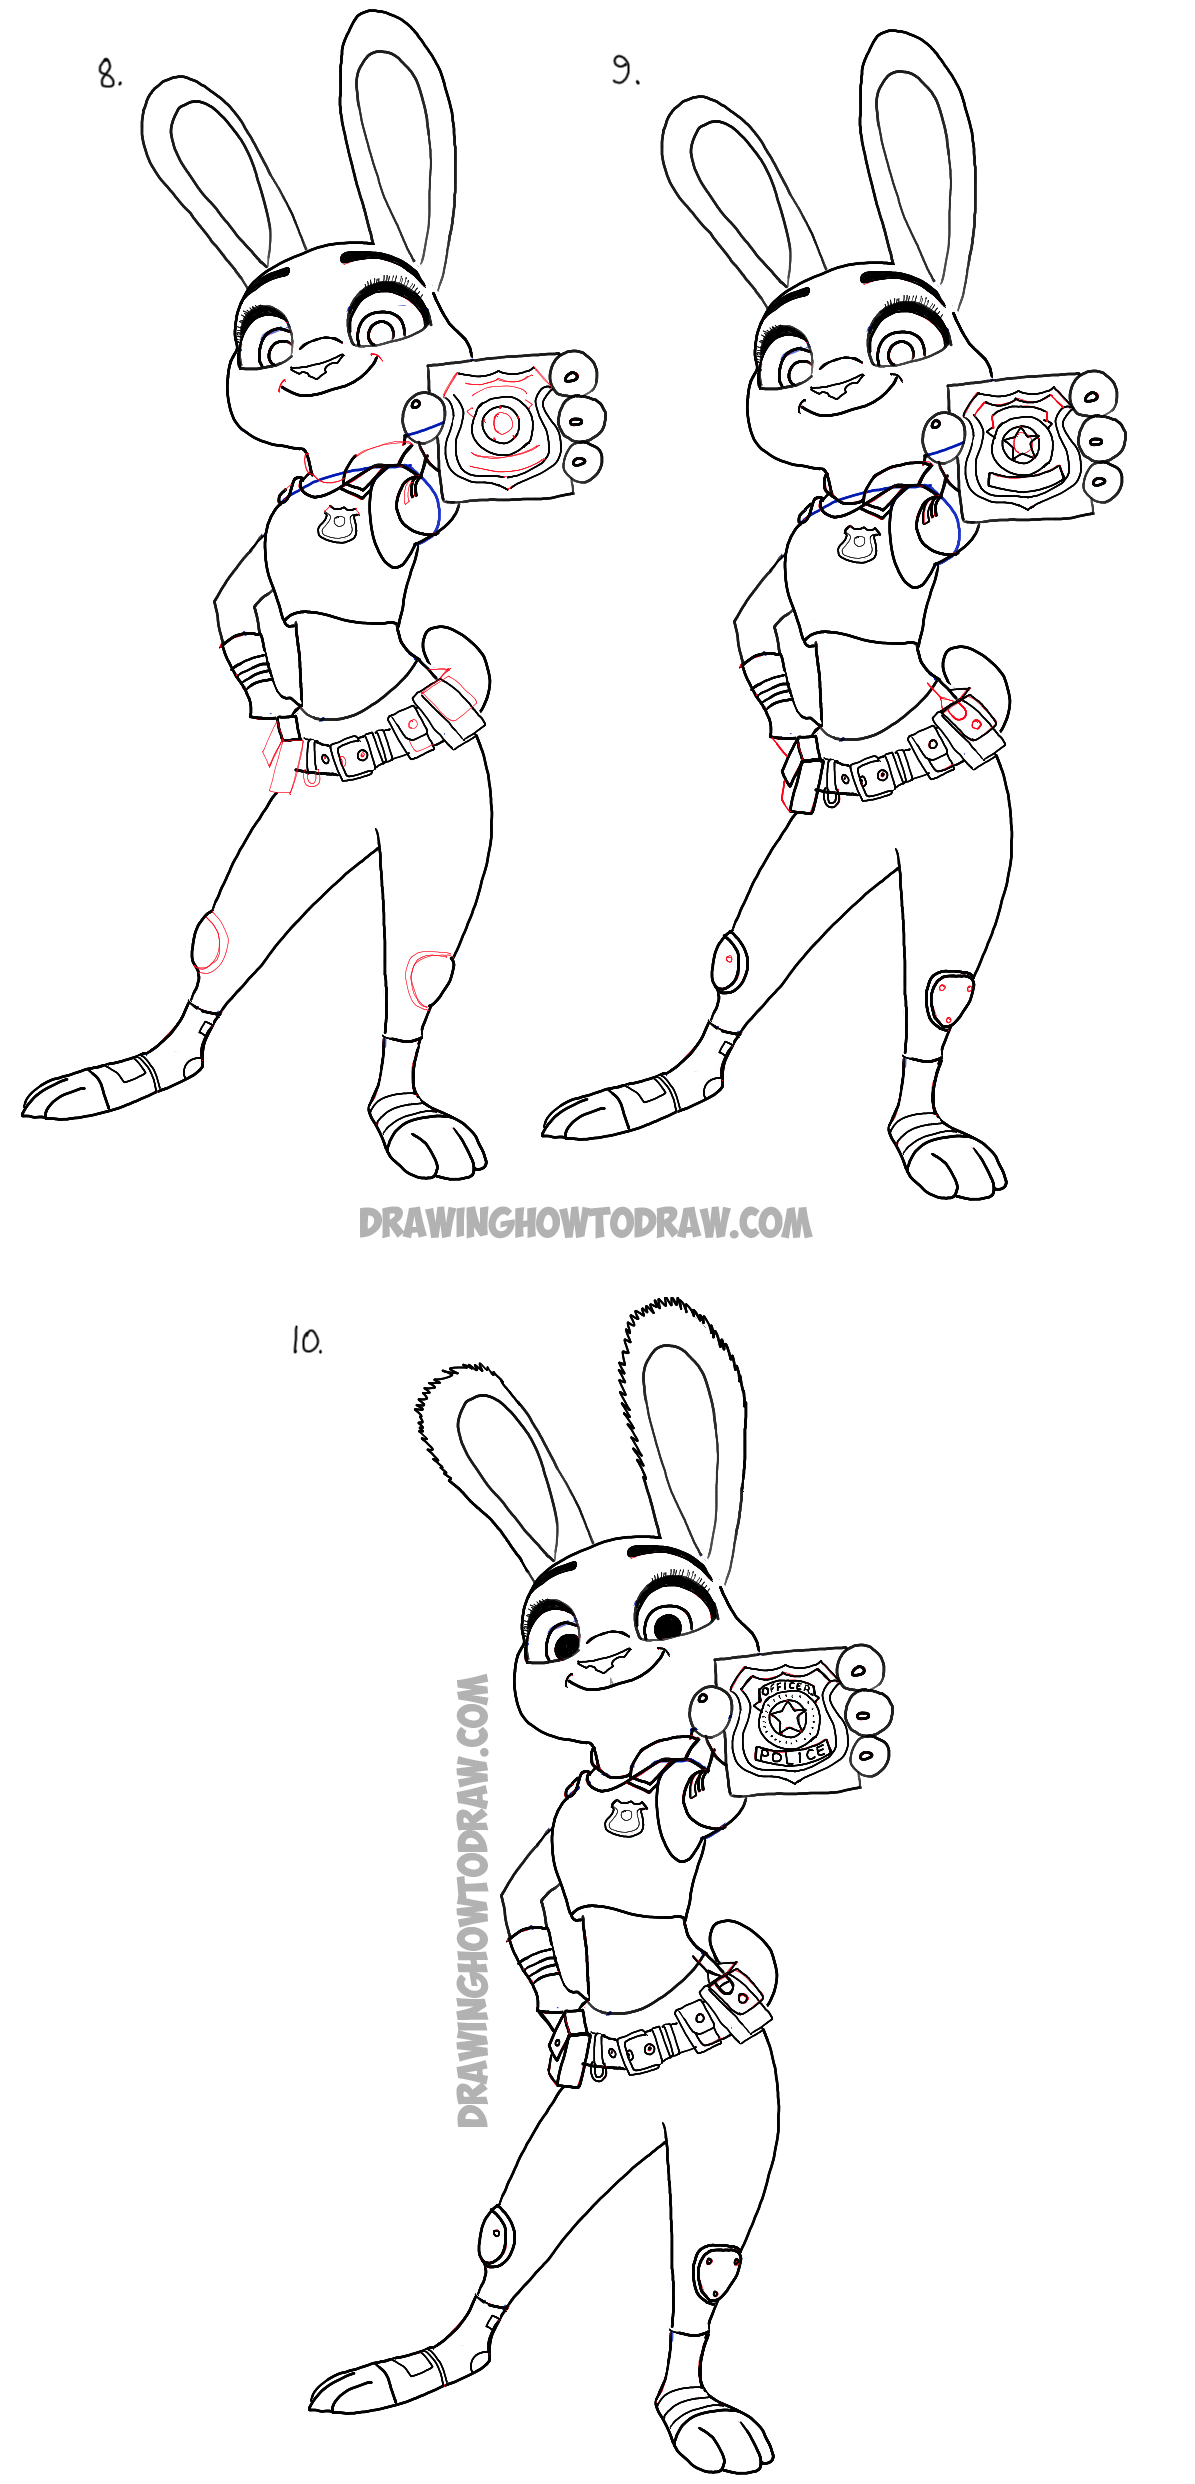 How to Draw Judy Hopps from Zootopia : Easy Step by Step Drawing Tutorial